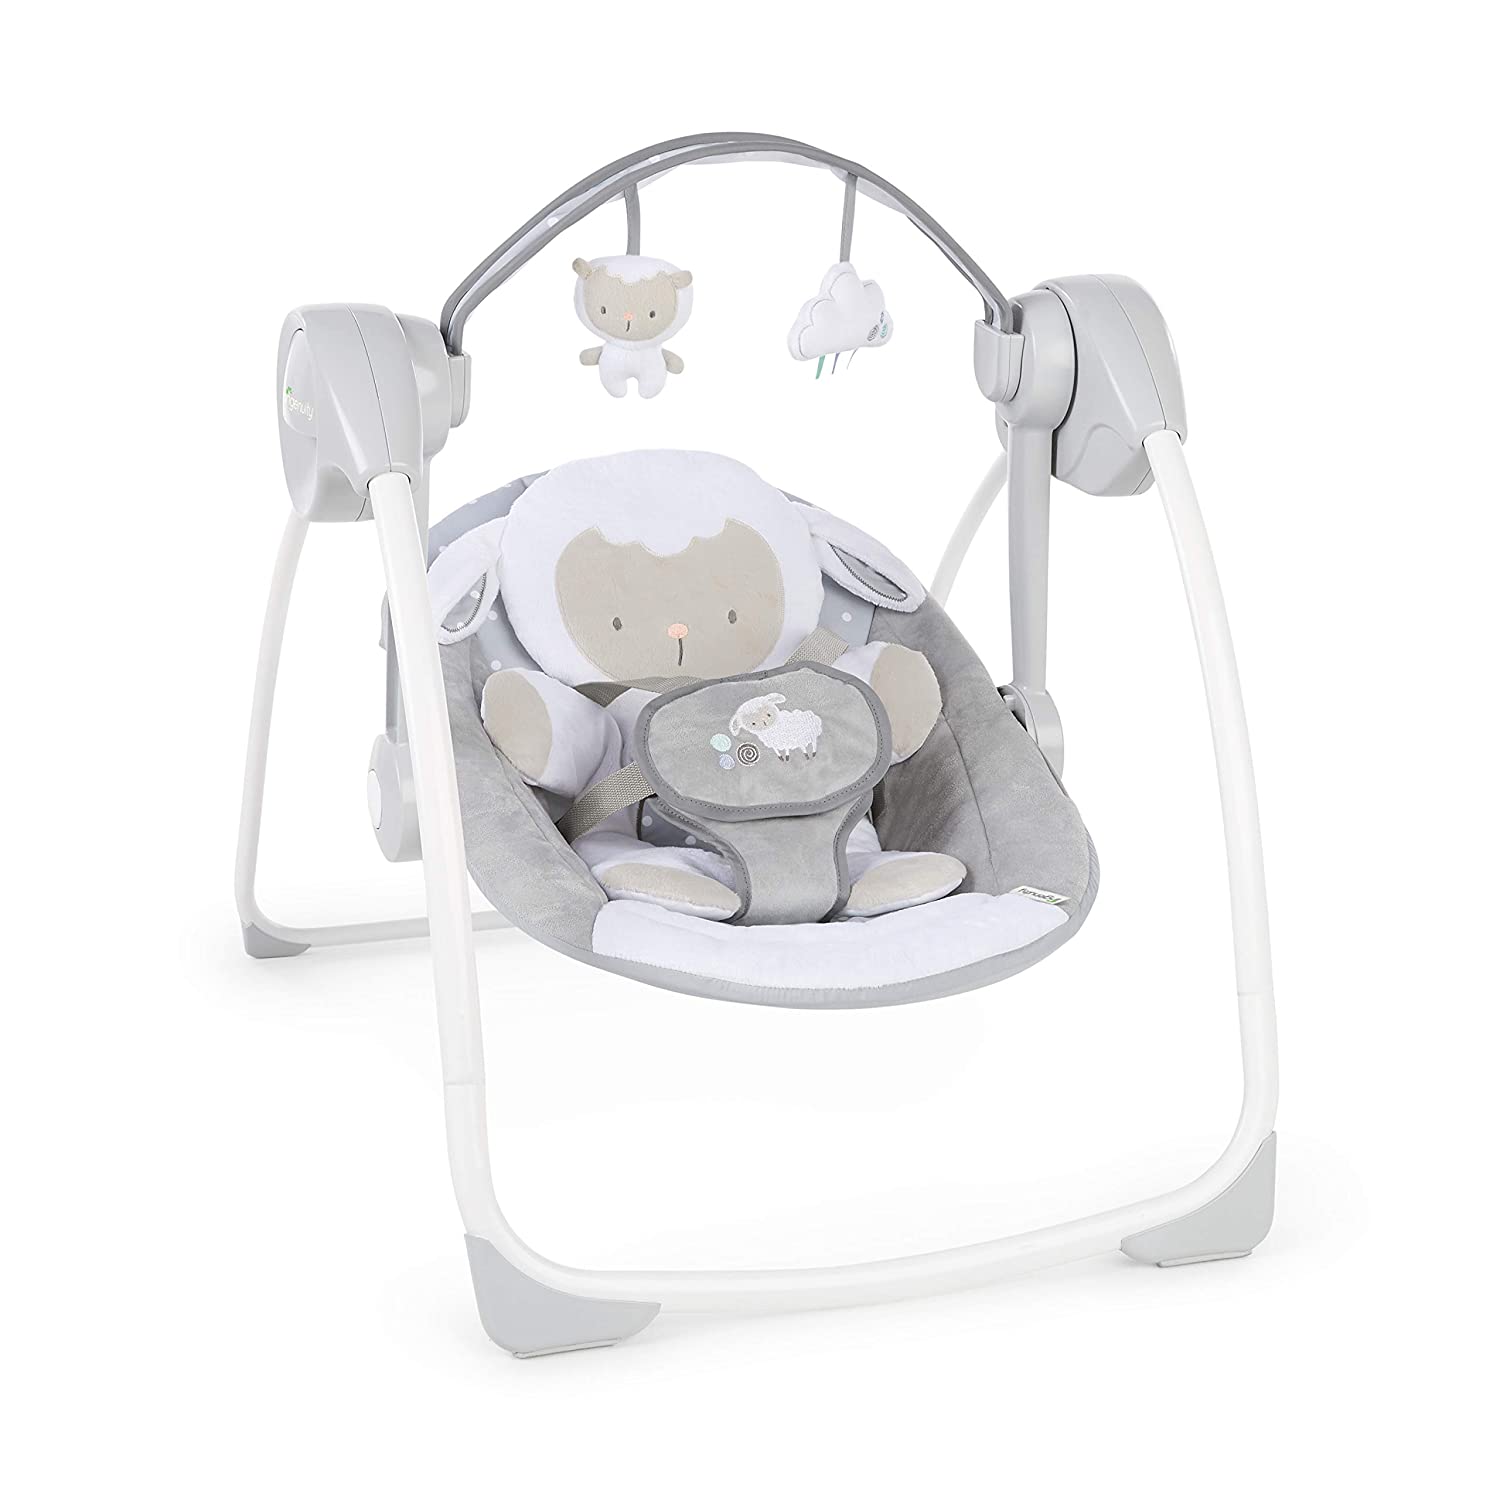 M201214-303 baby carriage, mix color Deluxe portable swing